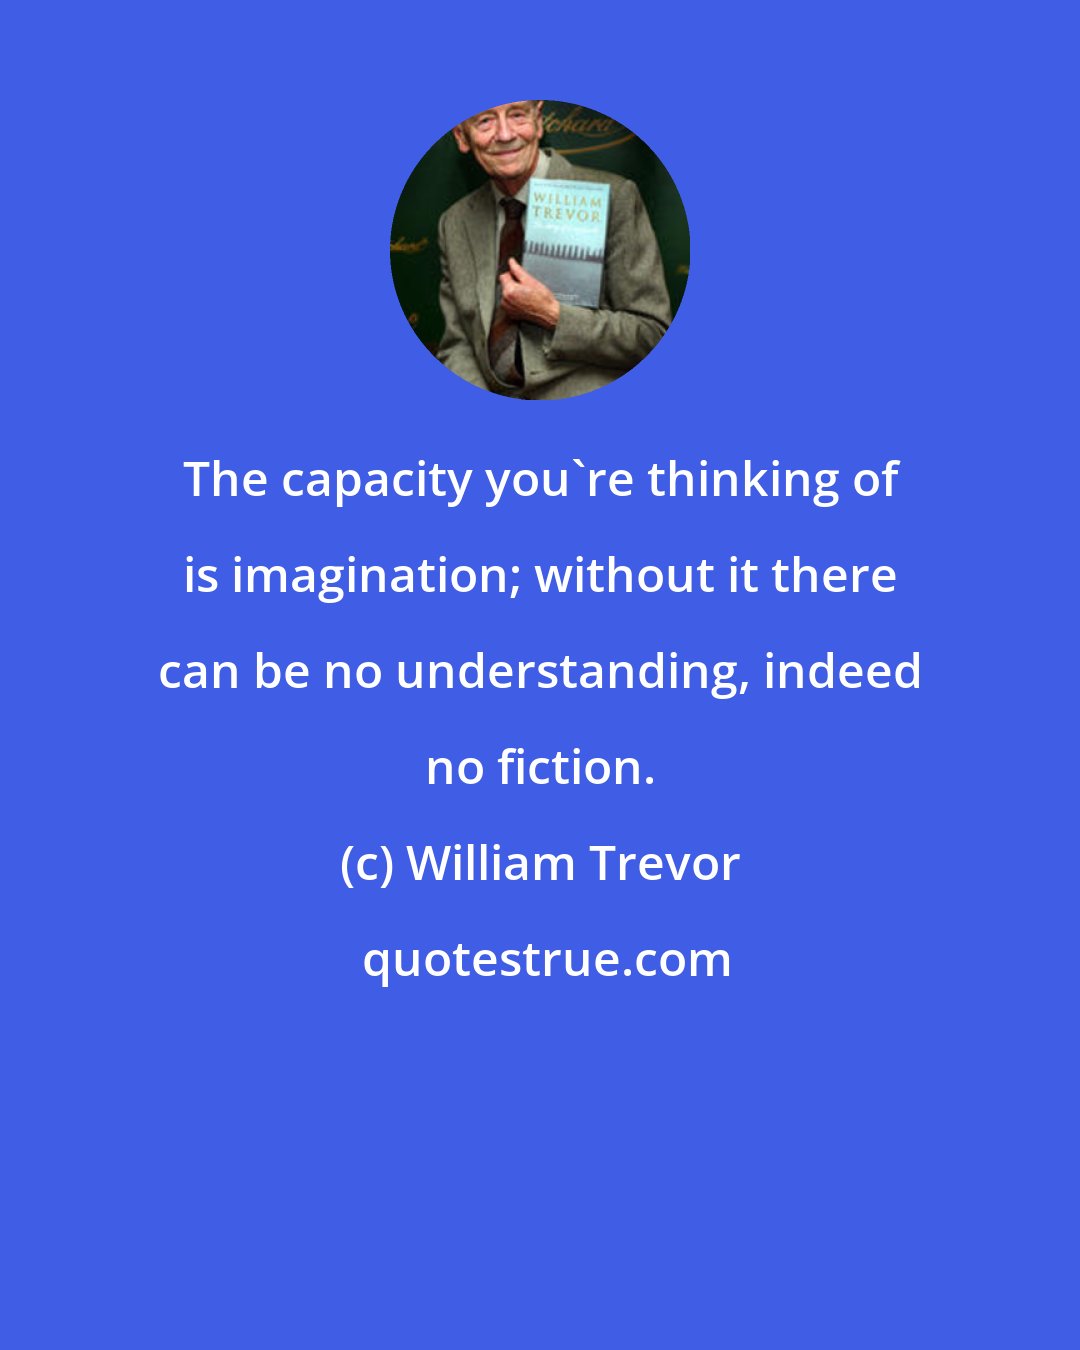 William Trevor: The capacity you're thinking of is imagination; without it there can be no understanding, indeed no fiction.